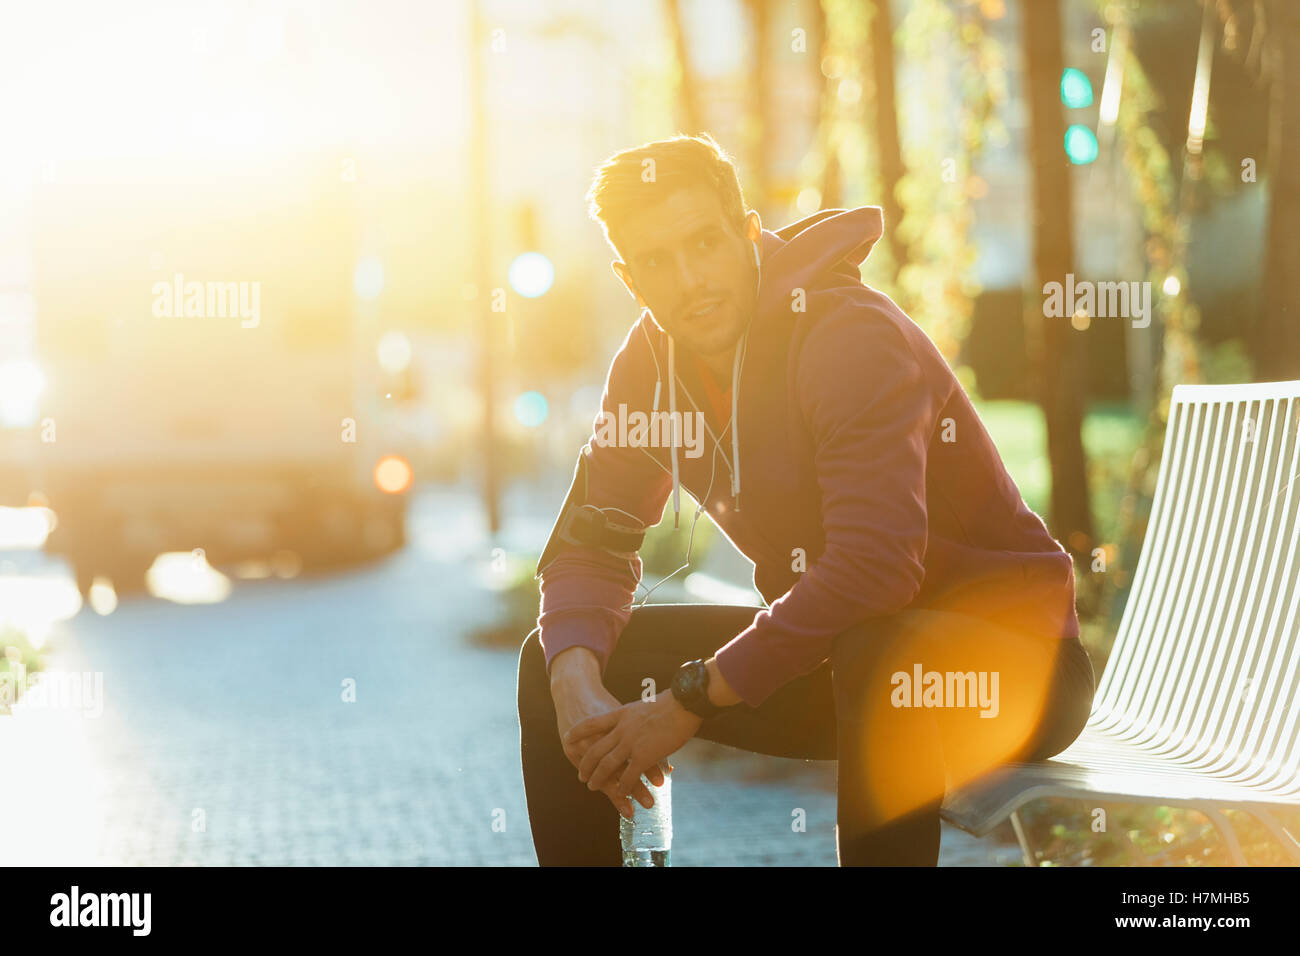 Athlete resting on the bench with bottle of water Stock Photo